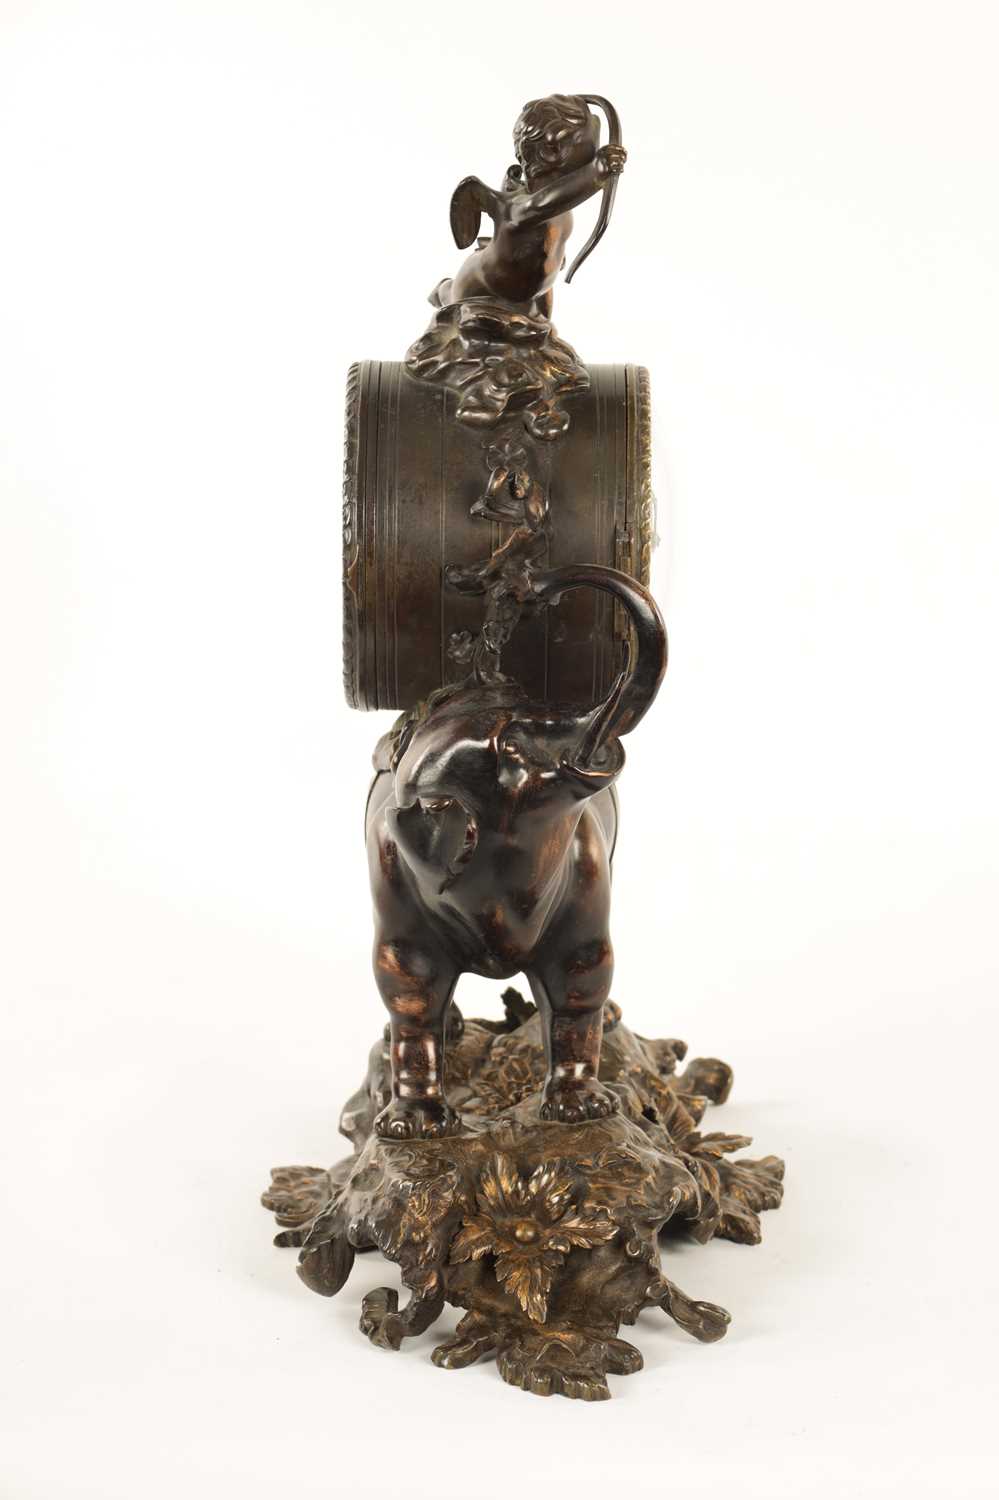 THUILLIER, A PARIS. A LATE 19TH CENTURY FRENCH PATINATED BRONZE MANTEL CLOCK - Image 8 of 14